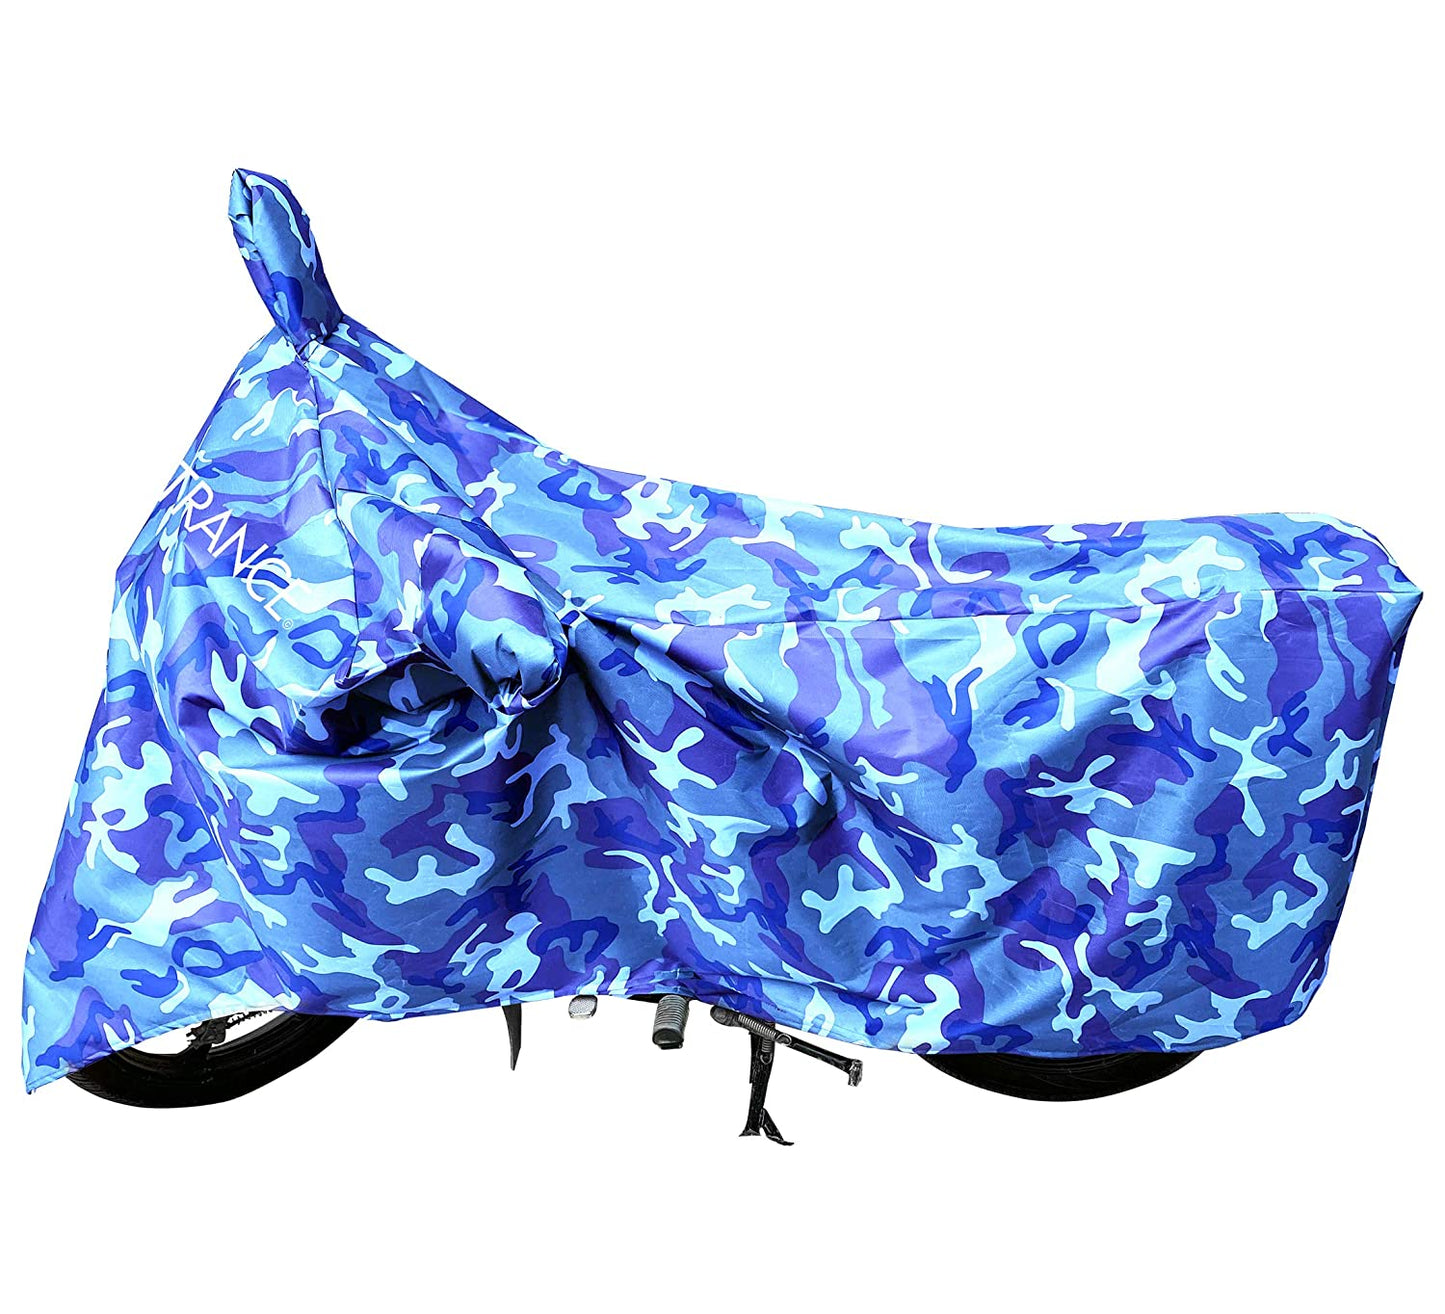 MotoTrance Jungle Bike Body Covers For Hero Passion Pro i3S - Interlock-Stitched Waterproof and Heat Resistant with Mirror Pockets